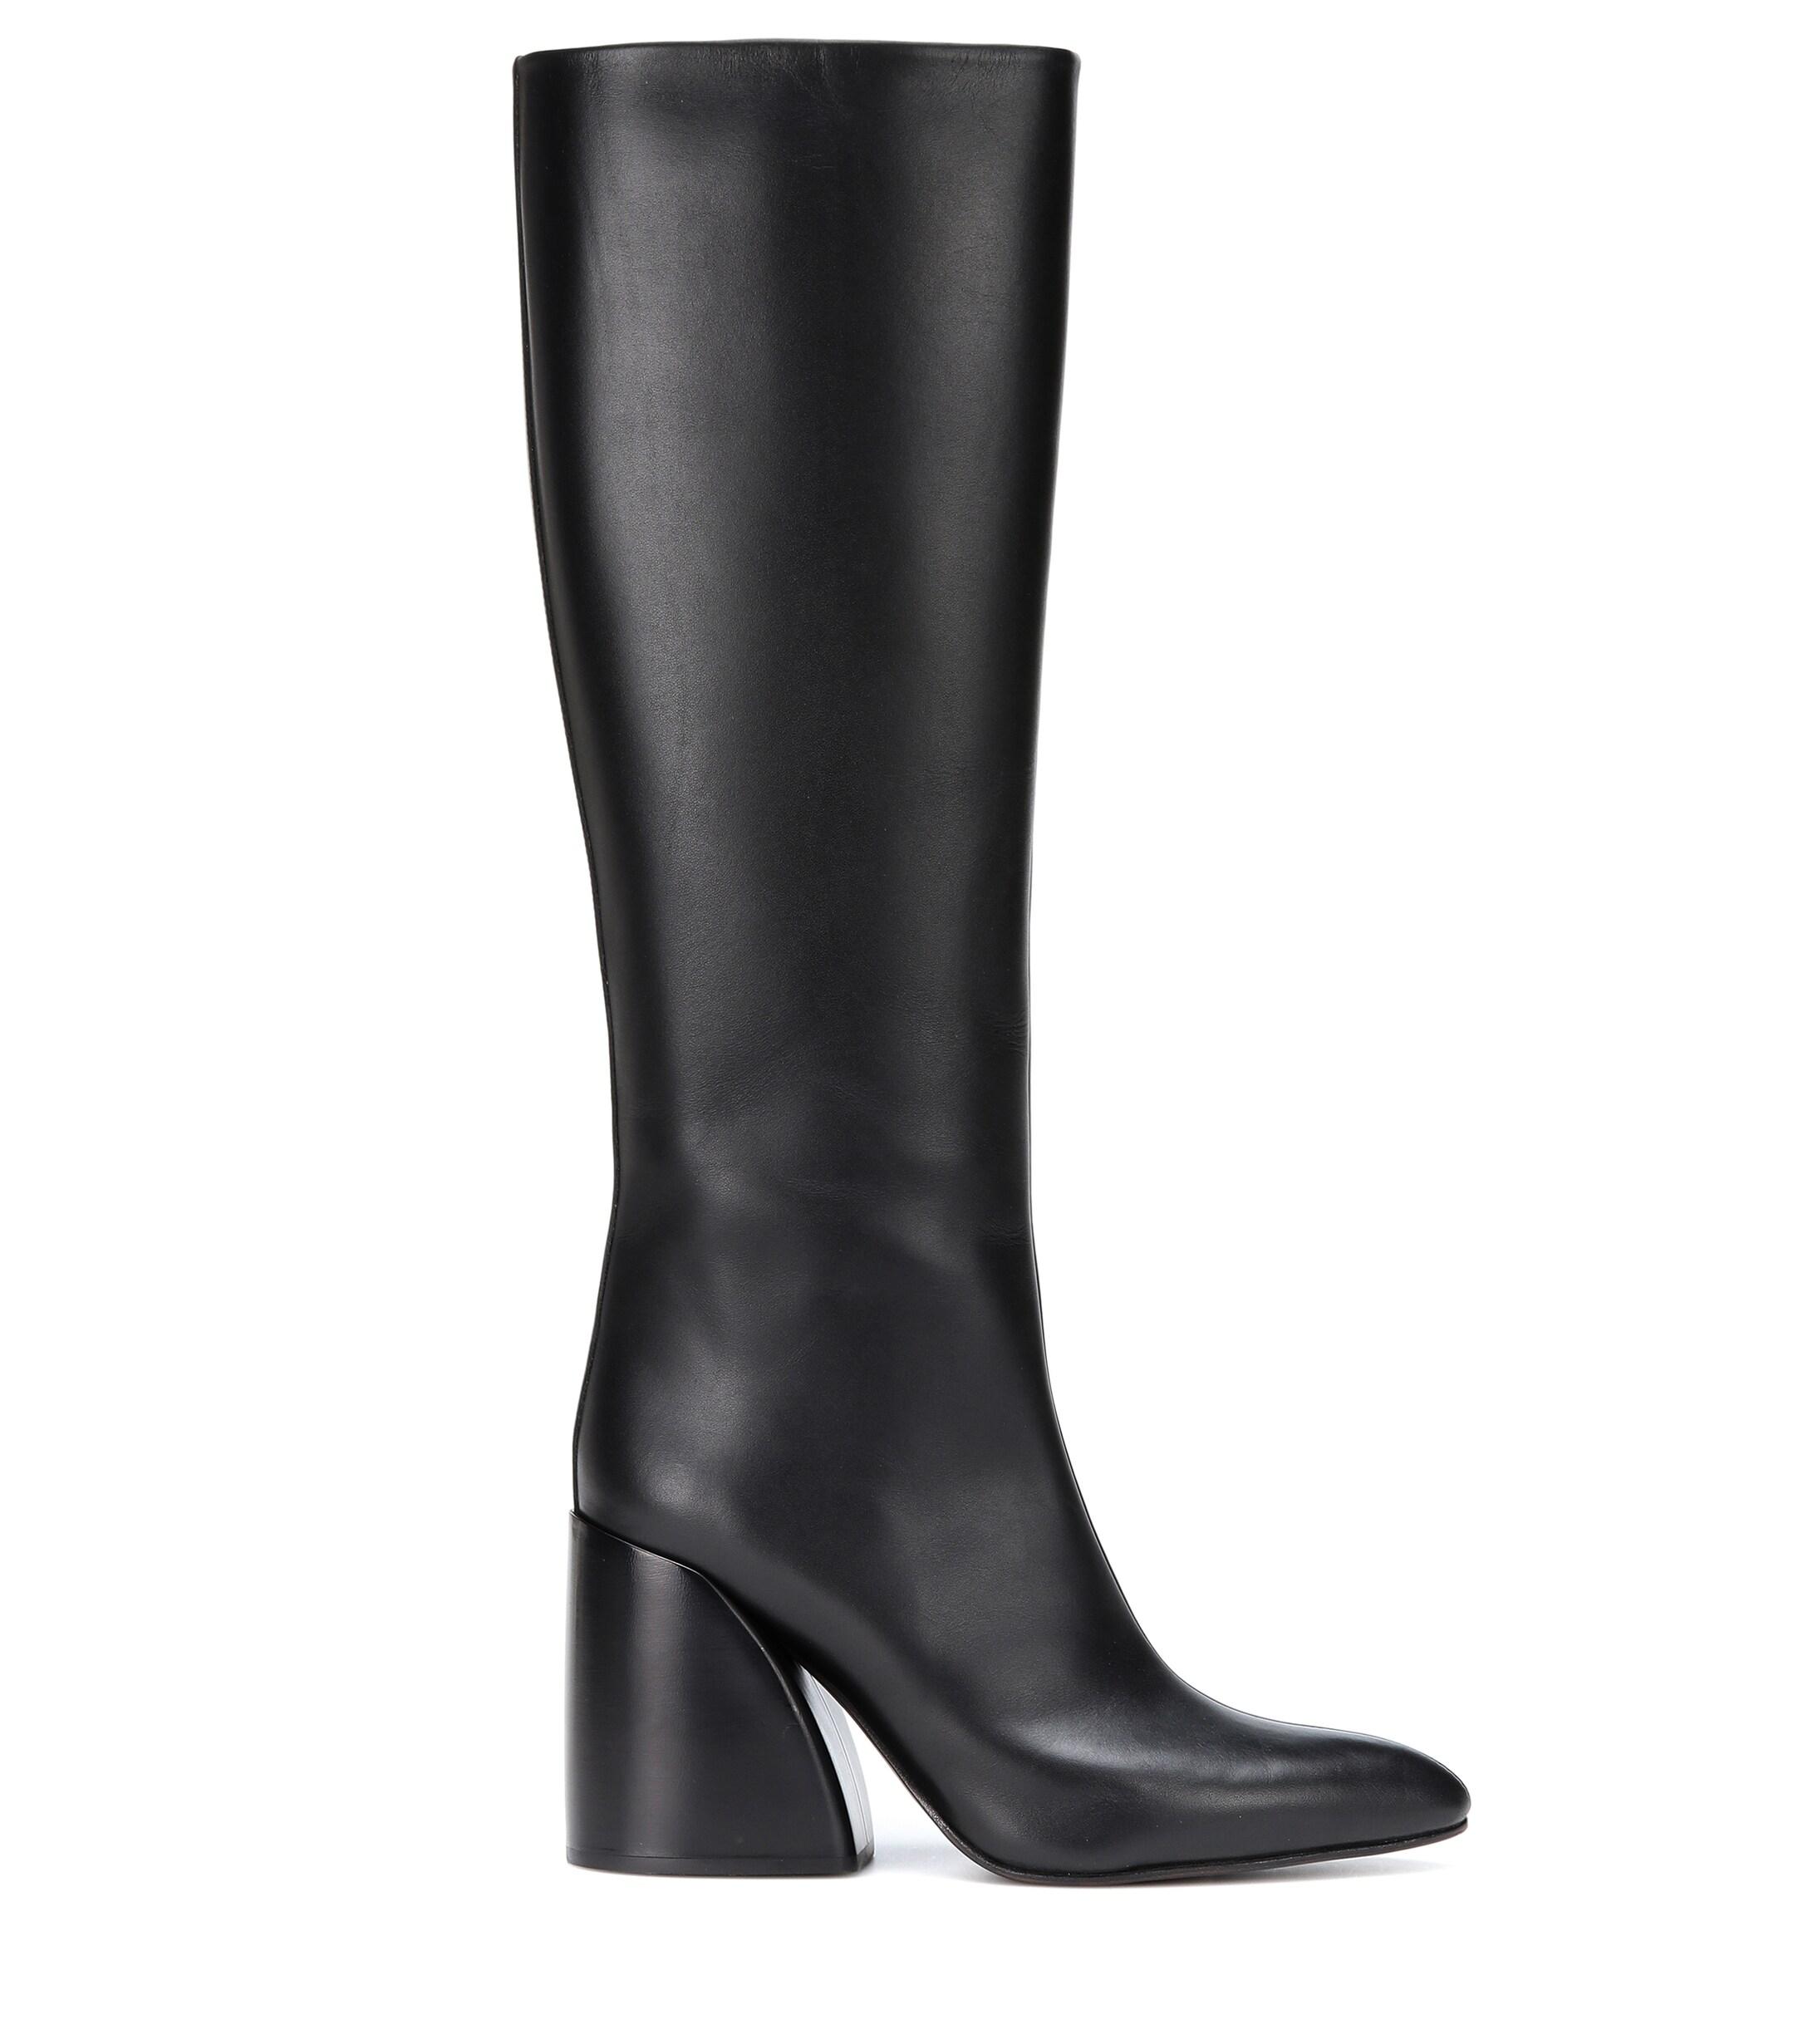 Chloé Leather Knee-high Boots in Black - Lyst